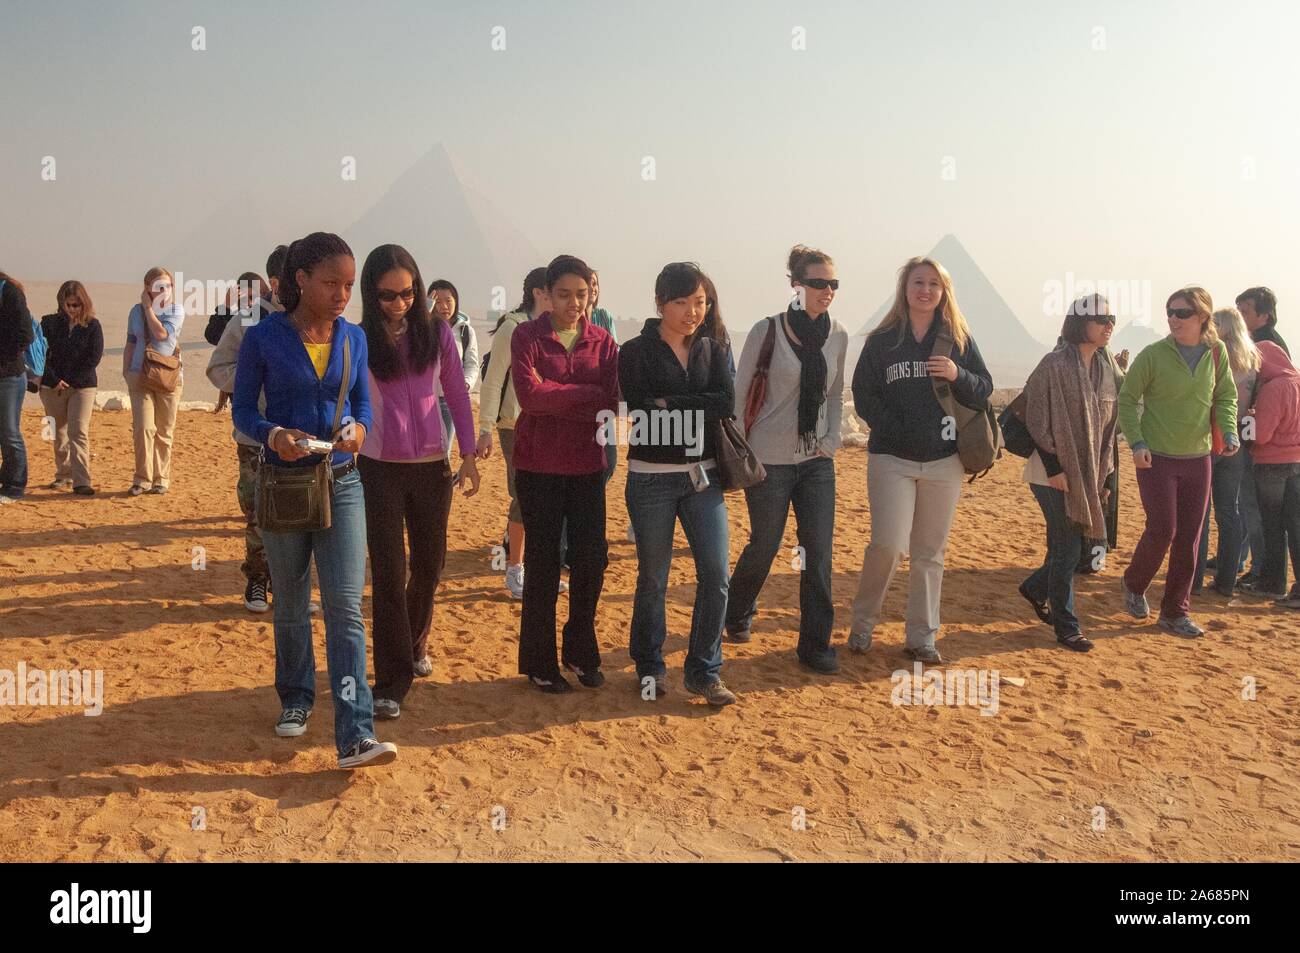 A group of Johns Hopkins University students, outside on a sunny day, walking toward the camera with several pyramids visible in the distance, Giza, Egypt during a study abroad program, January 7, 2008. From the Homewood Photography Collection. () Stock Photo